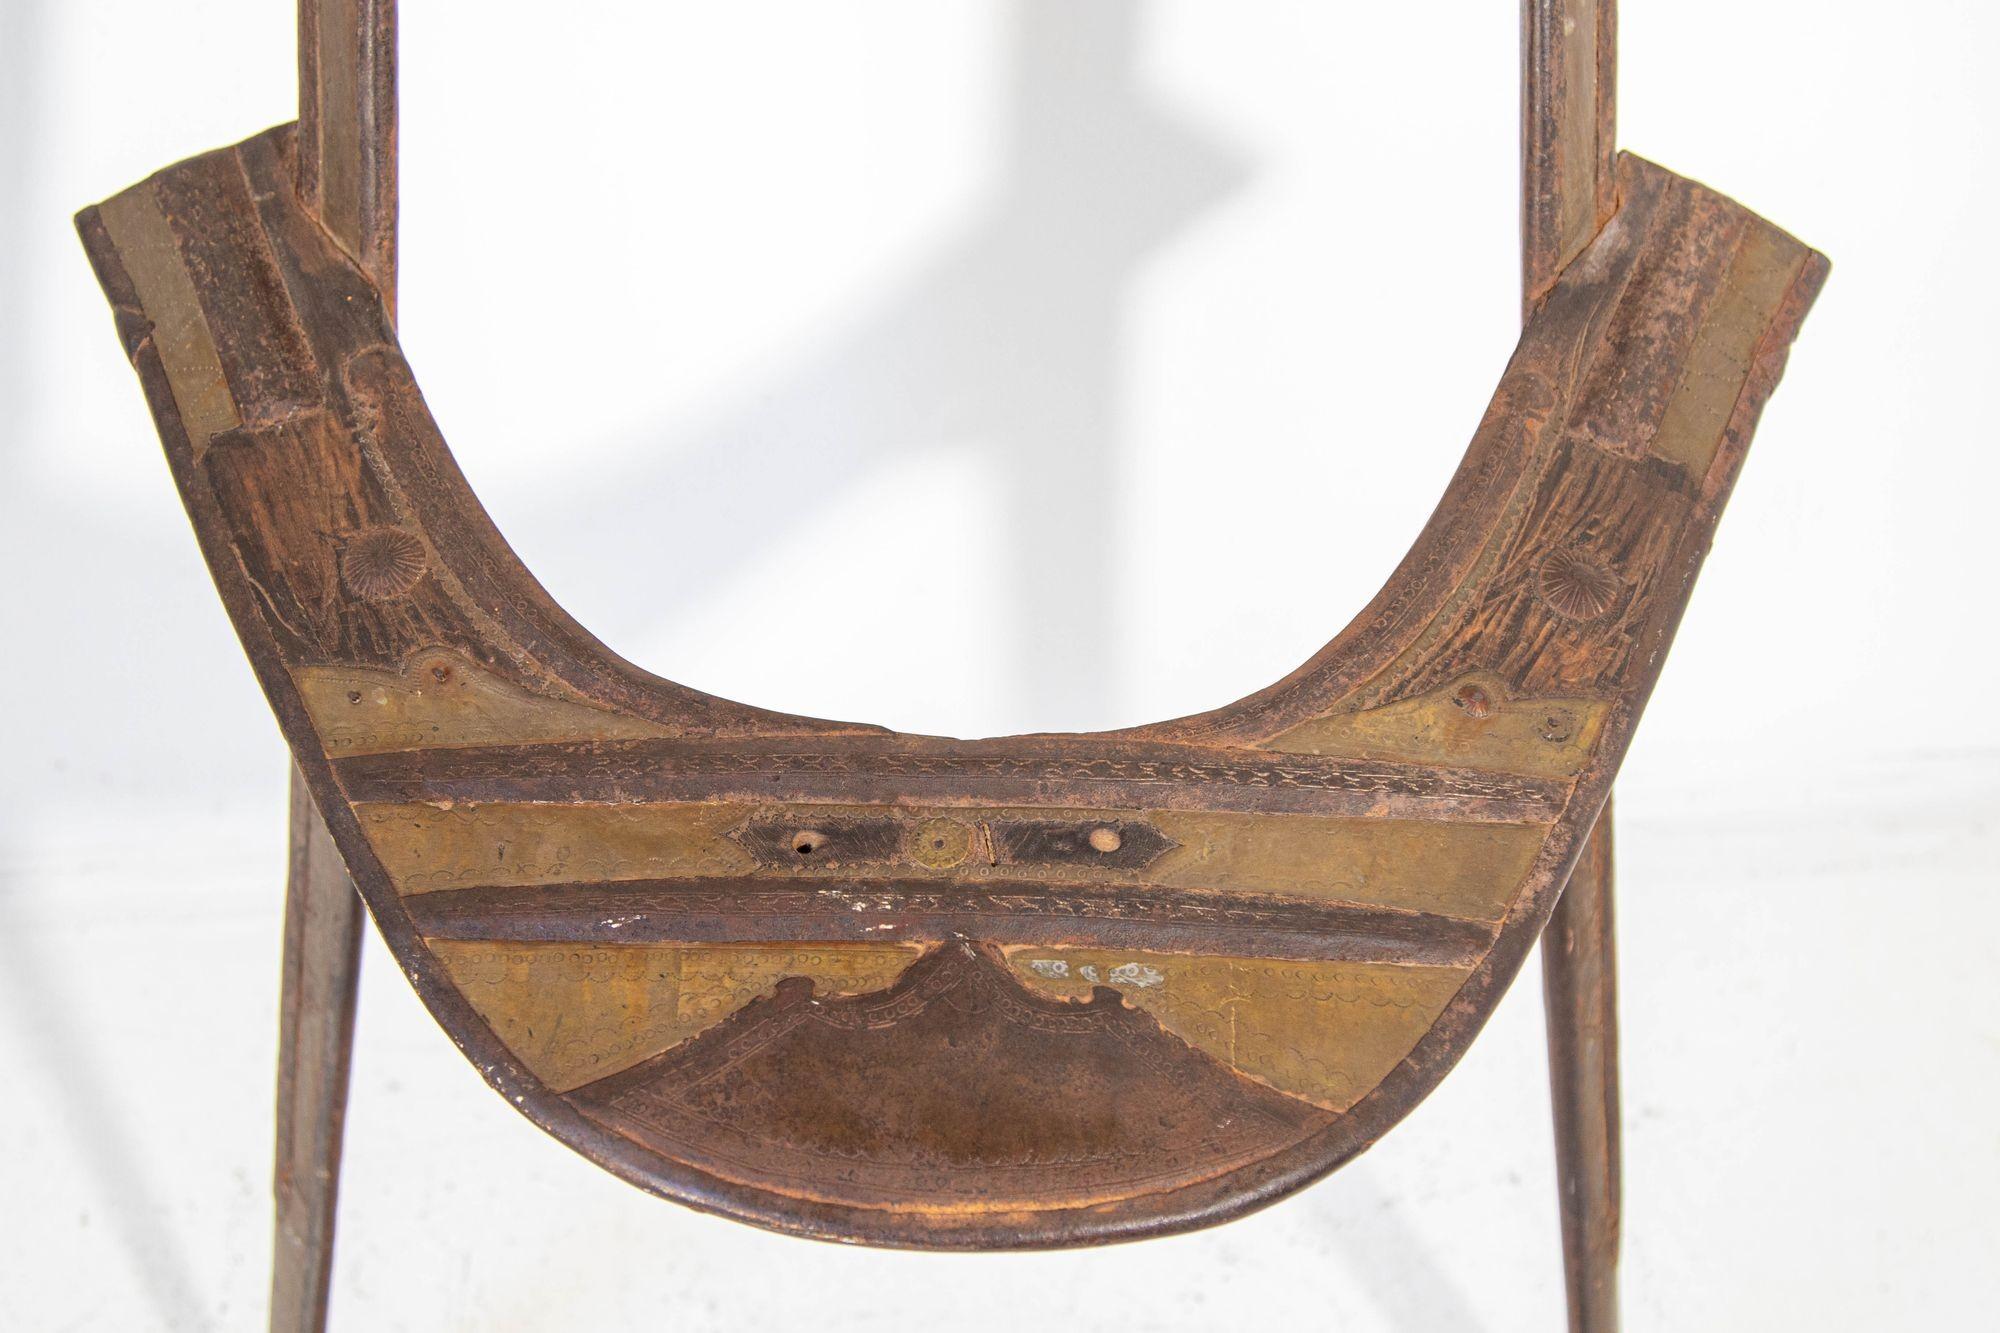 Wood and Brass Antique 19th Century Middle Eastern Camel Seat Saddle For Sale 9